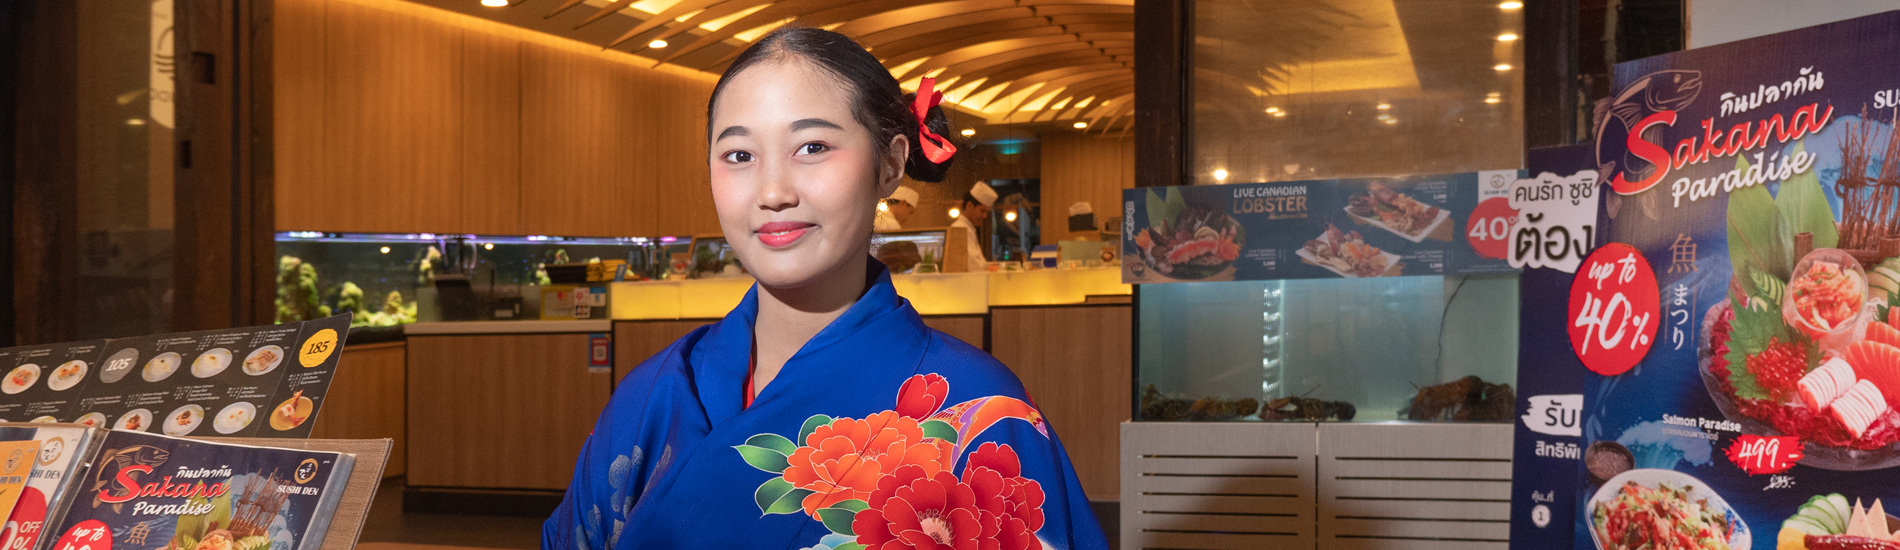 Salmon is Here to Stay -: Fresh Norwegian salmon is a must on the menu of the more than 1,500 Japanese restaurants in Bangkok.